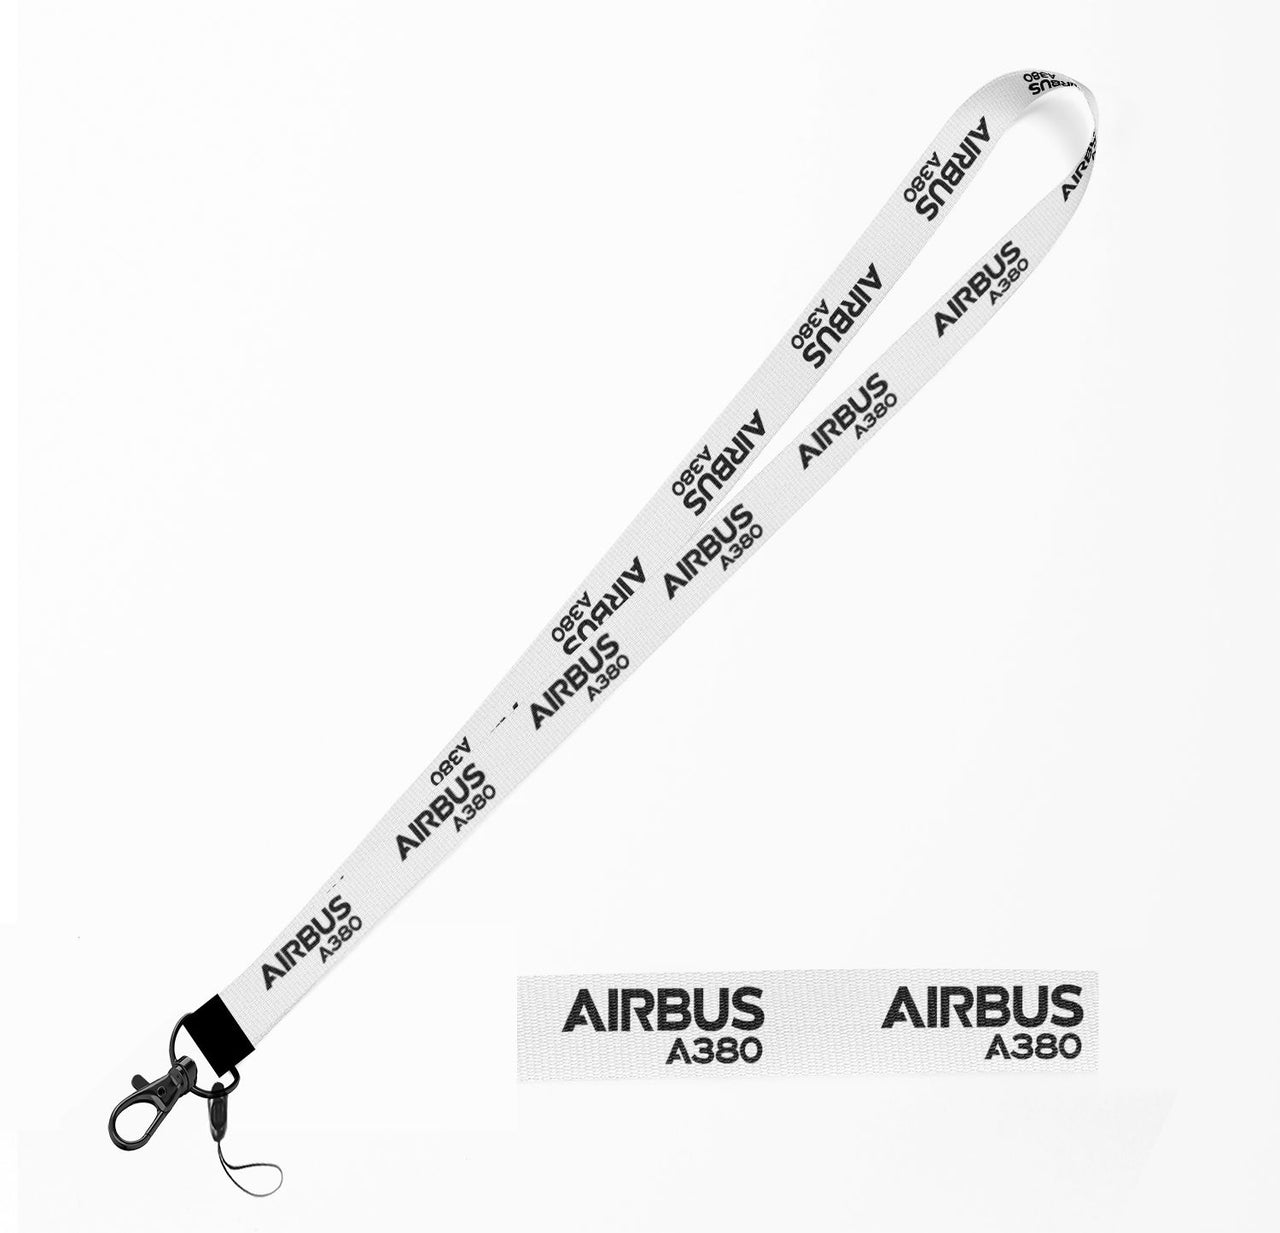 Airbus A380 & Text Designed Lanyard & ID Holders